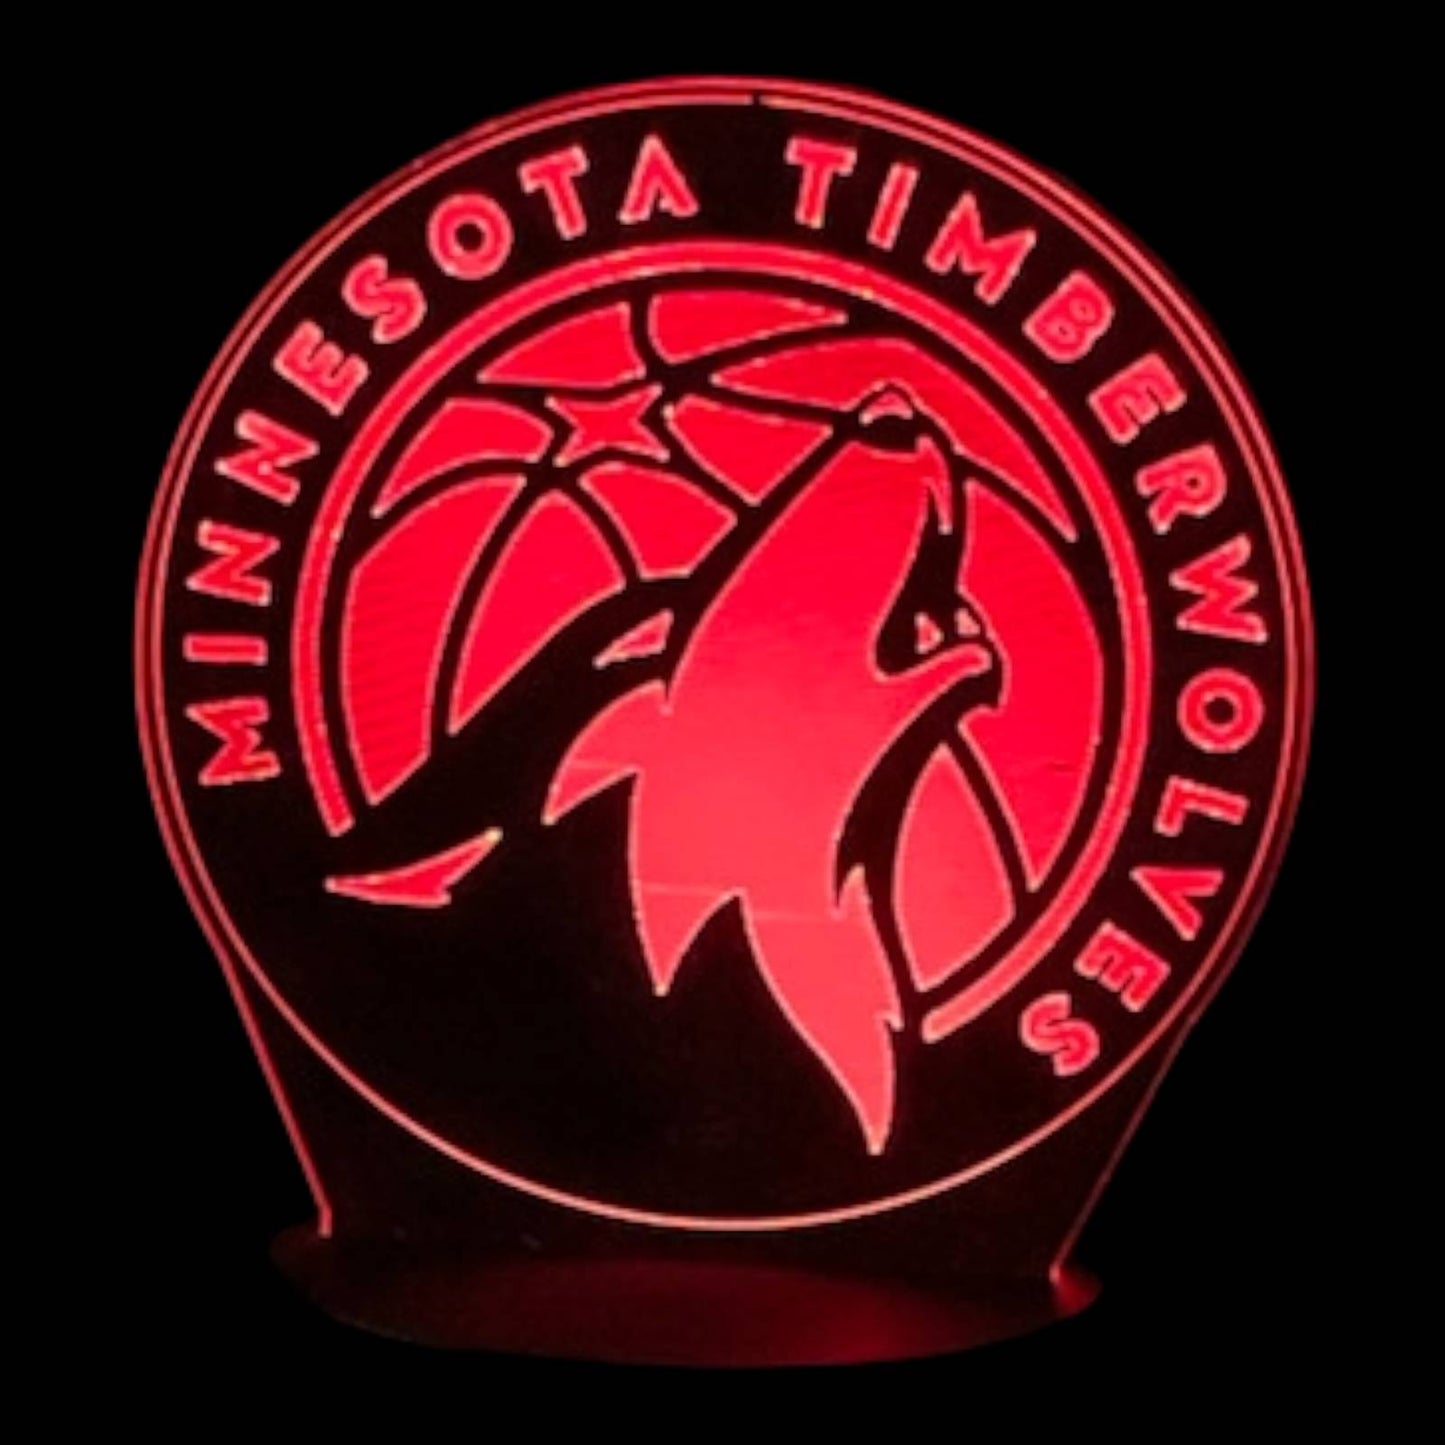 Minnesota Timberwolves 3D LED Night-Light 7 Color Changing Lamp w/ Touch Switch